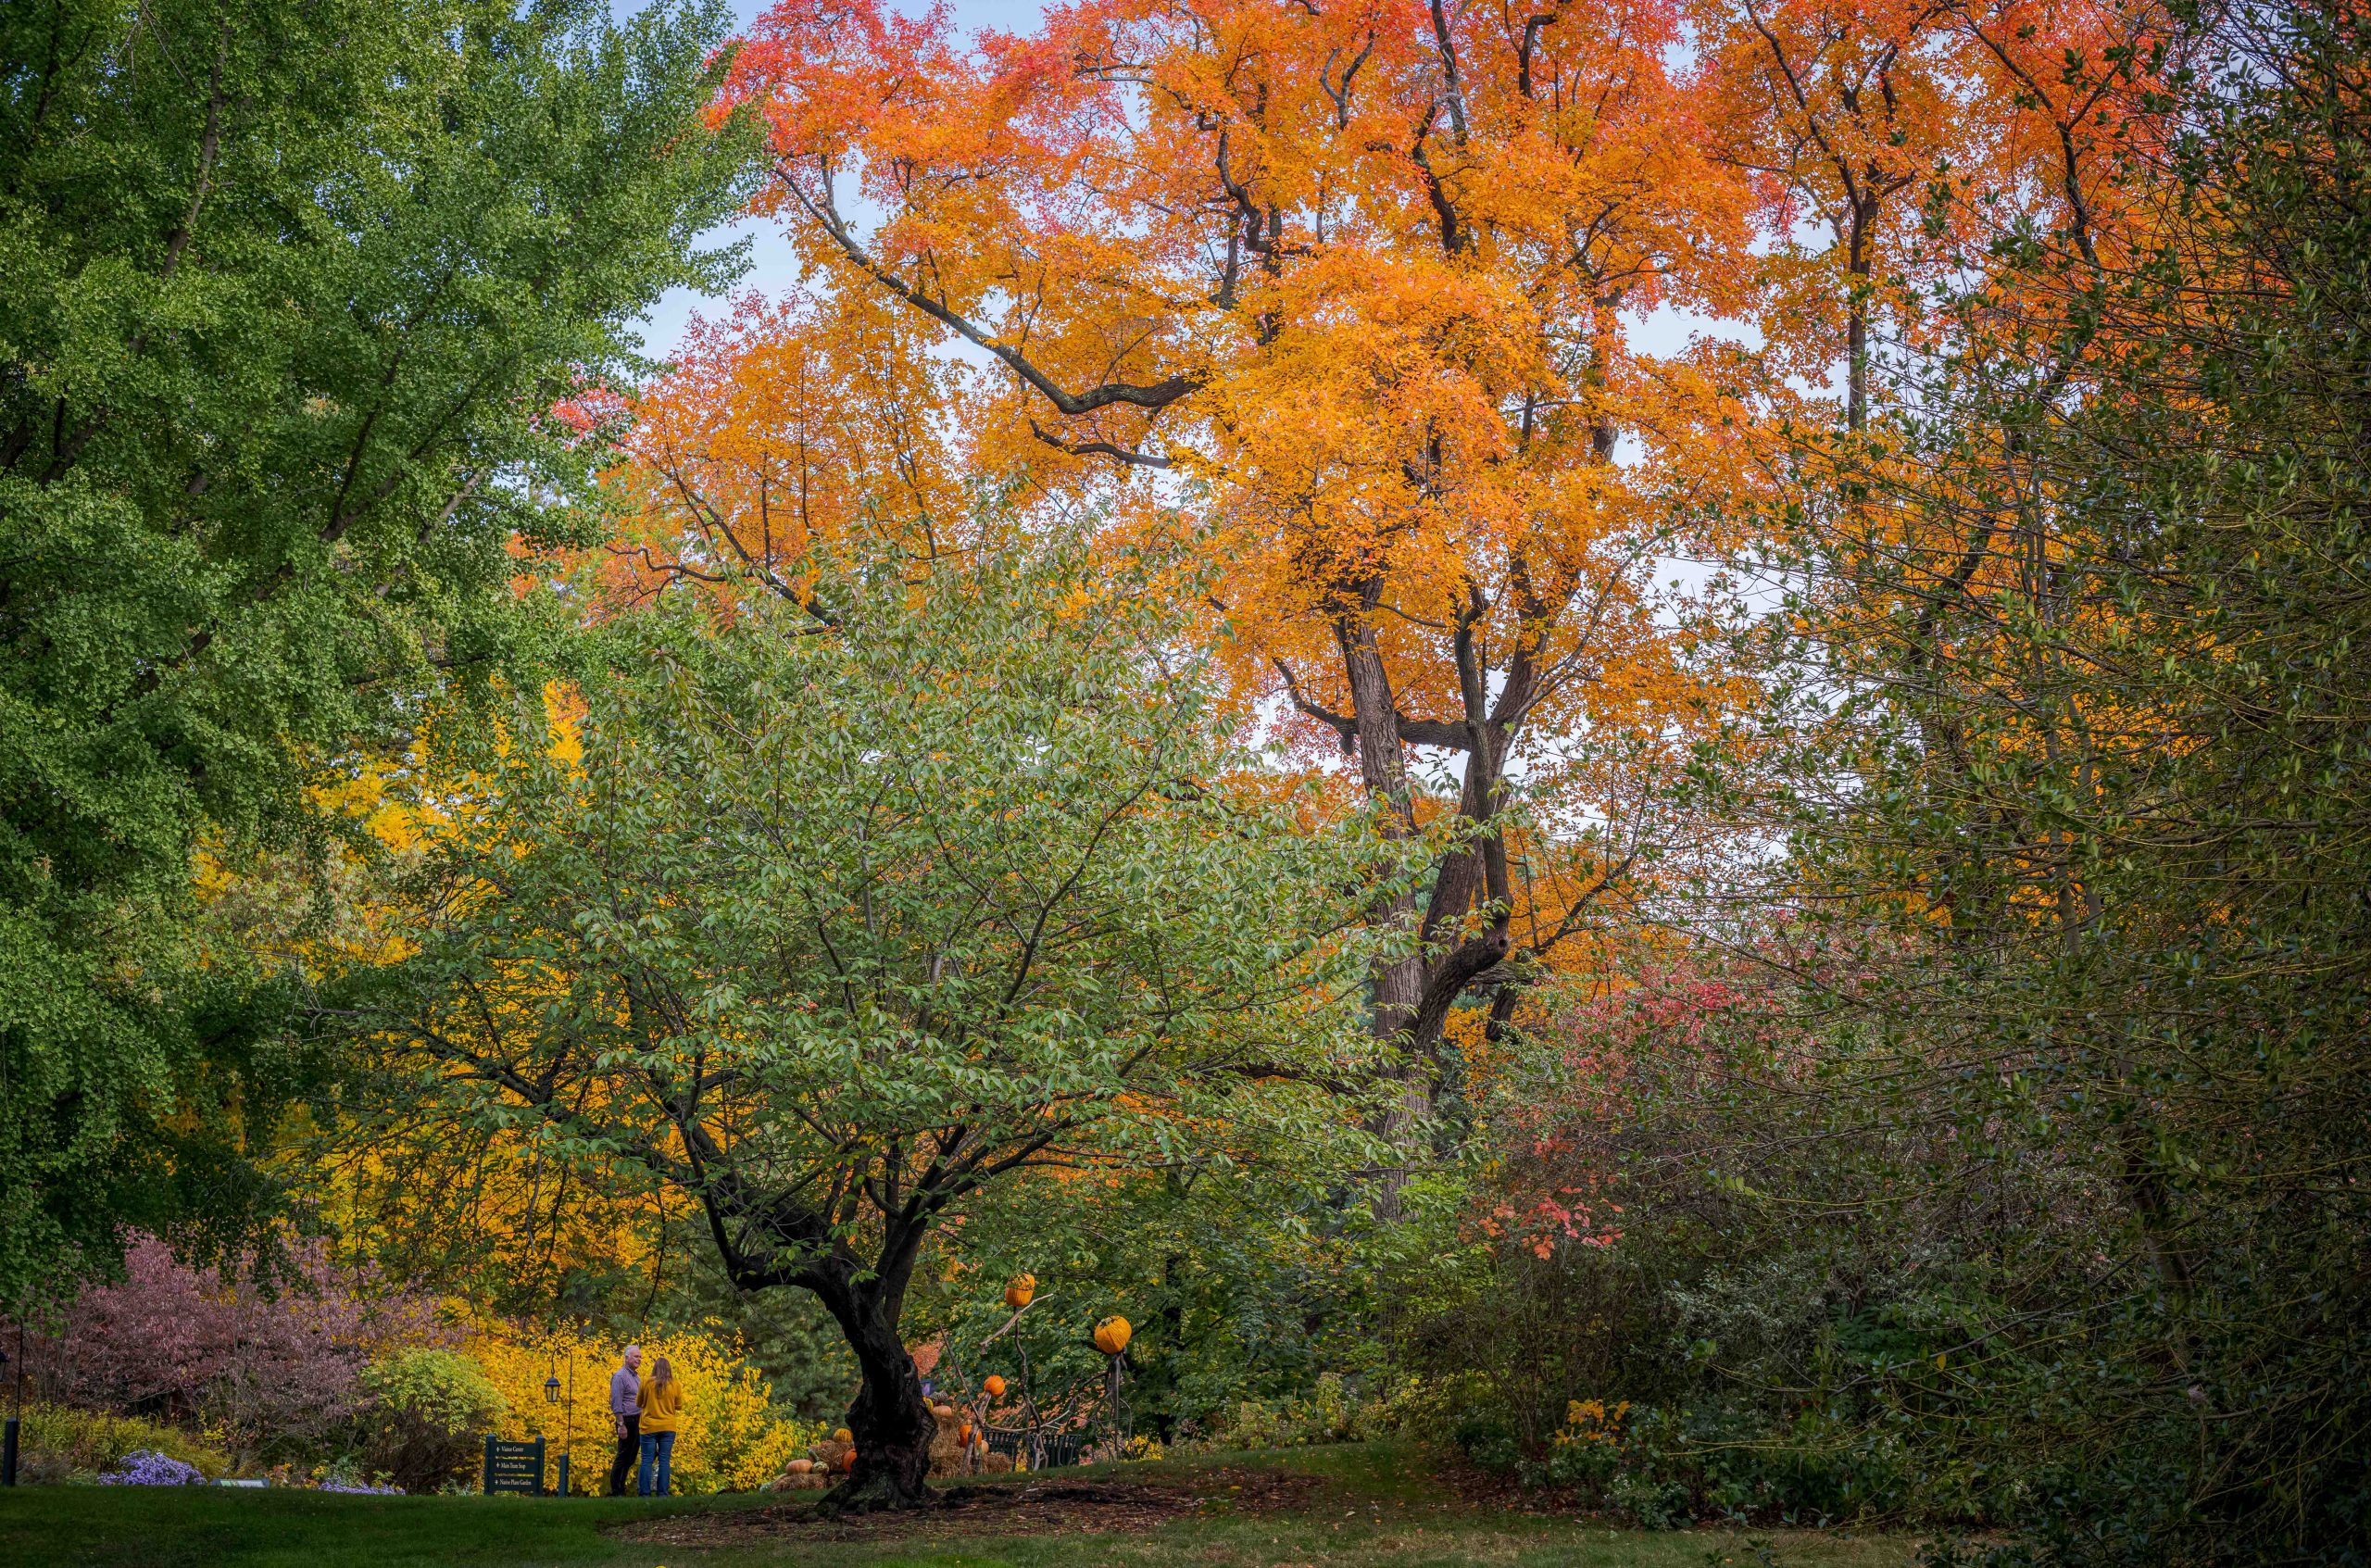 A tall orange-leaved tree dwarfs another, shorter green tree in this fall scene